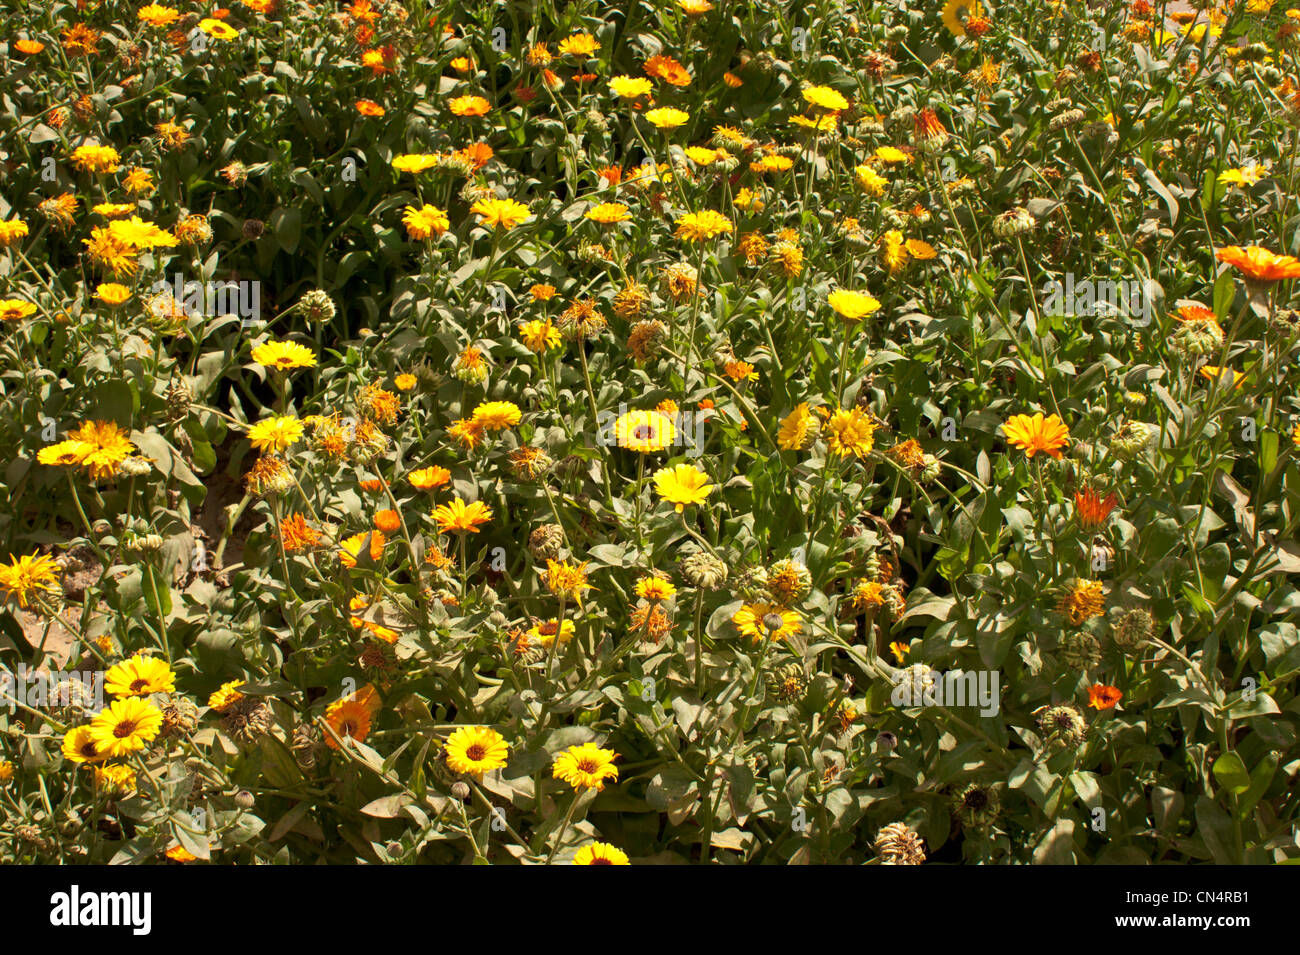 Field of yellow flowers inside the Garden of 5 Senses. This was a large bed and looked real beautiful, with a few red animals Stock Photo